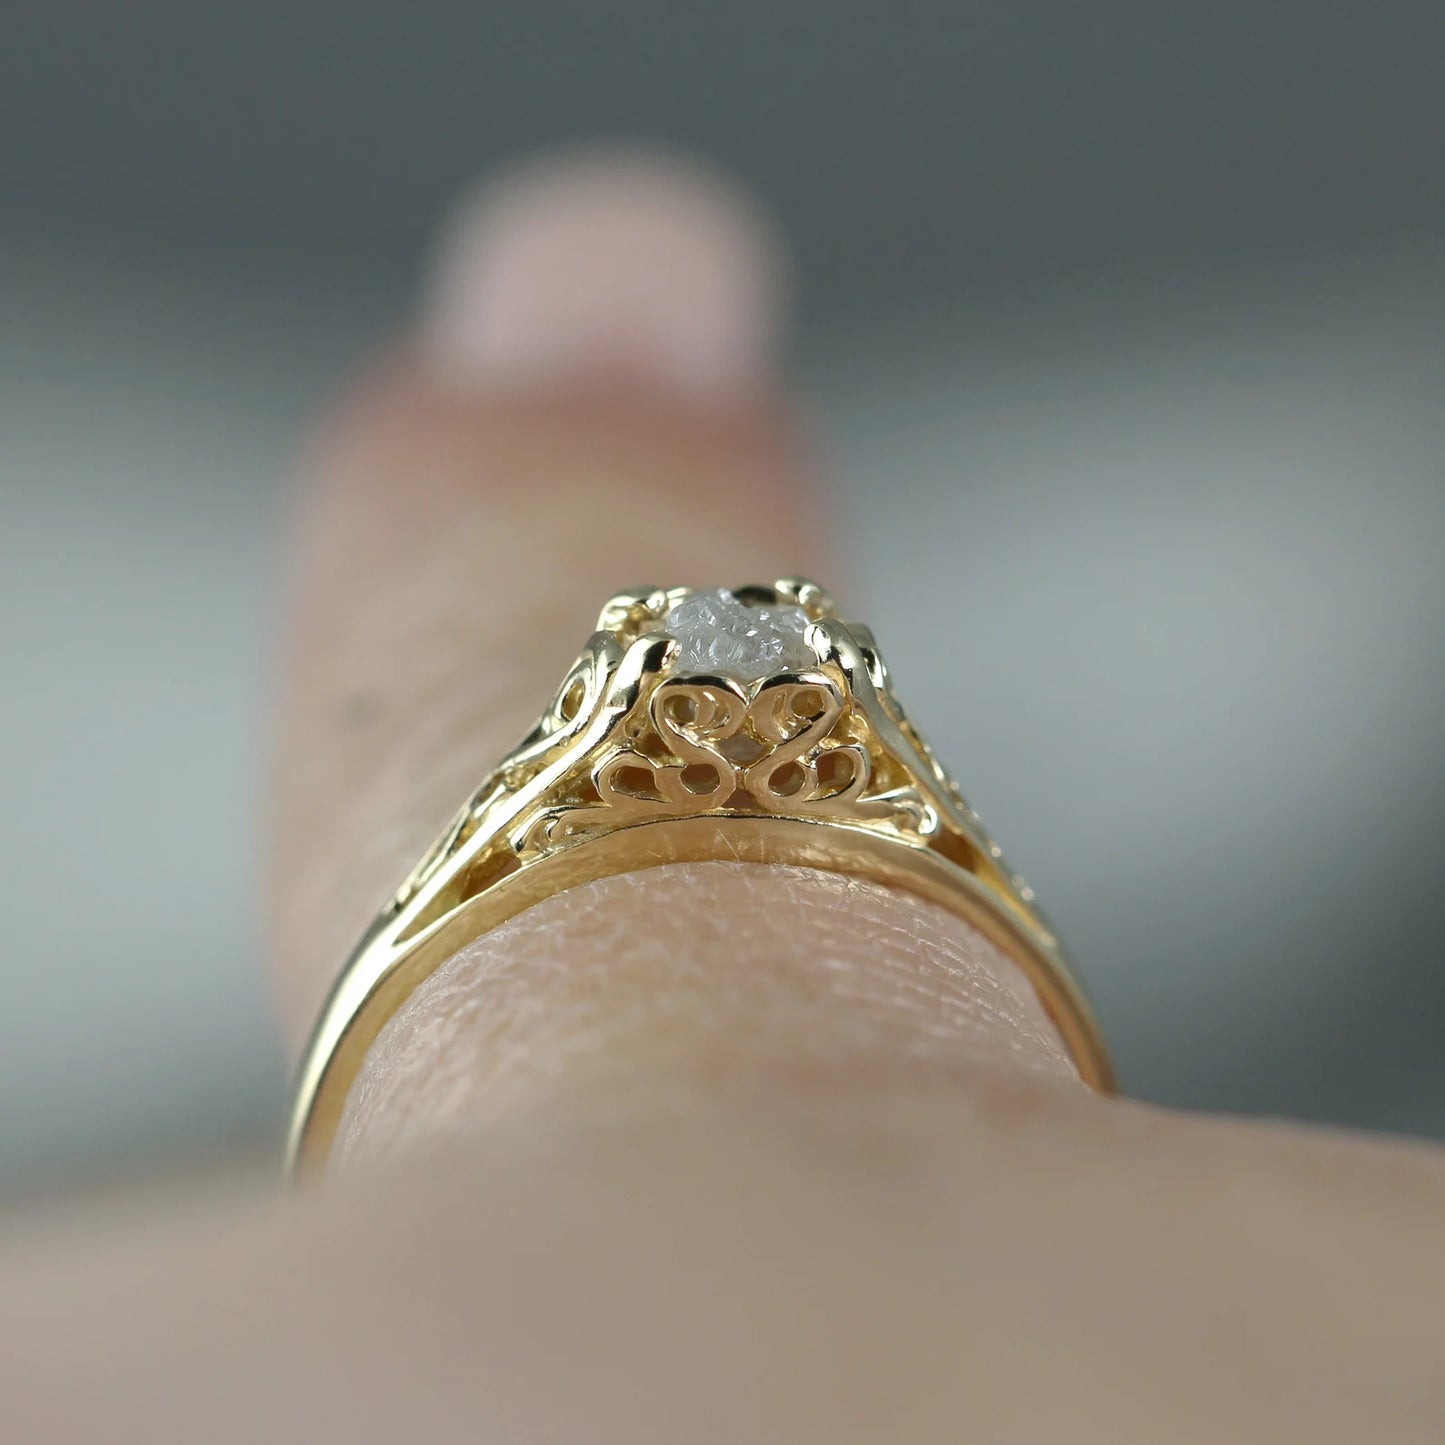 Antique Style 14K Yellow Gold and Raw Diamond Ring - Filigree Style Engagement Ring